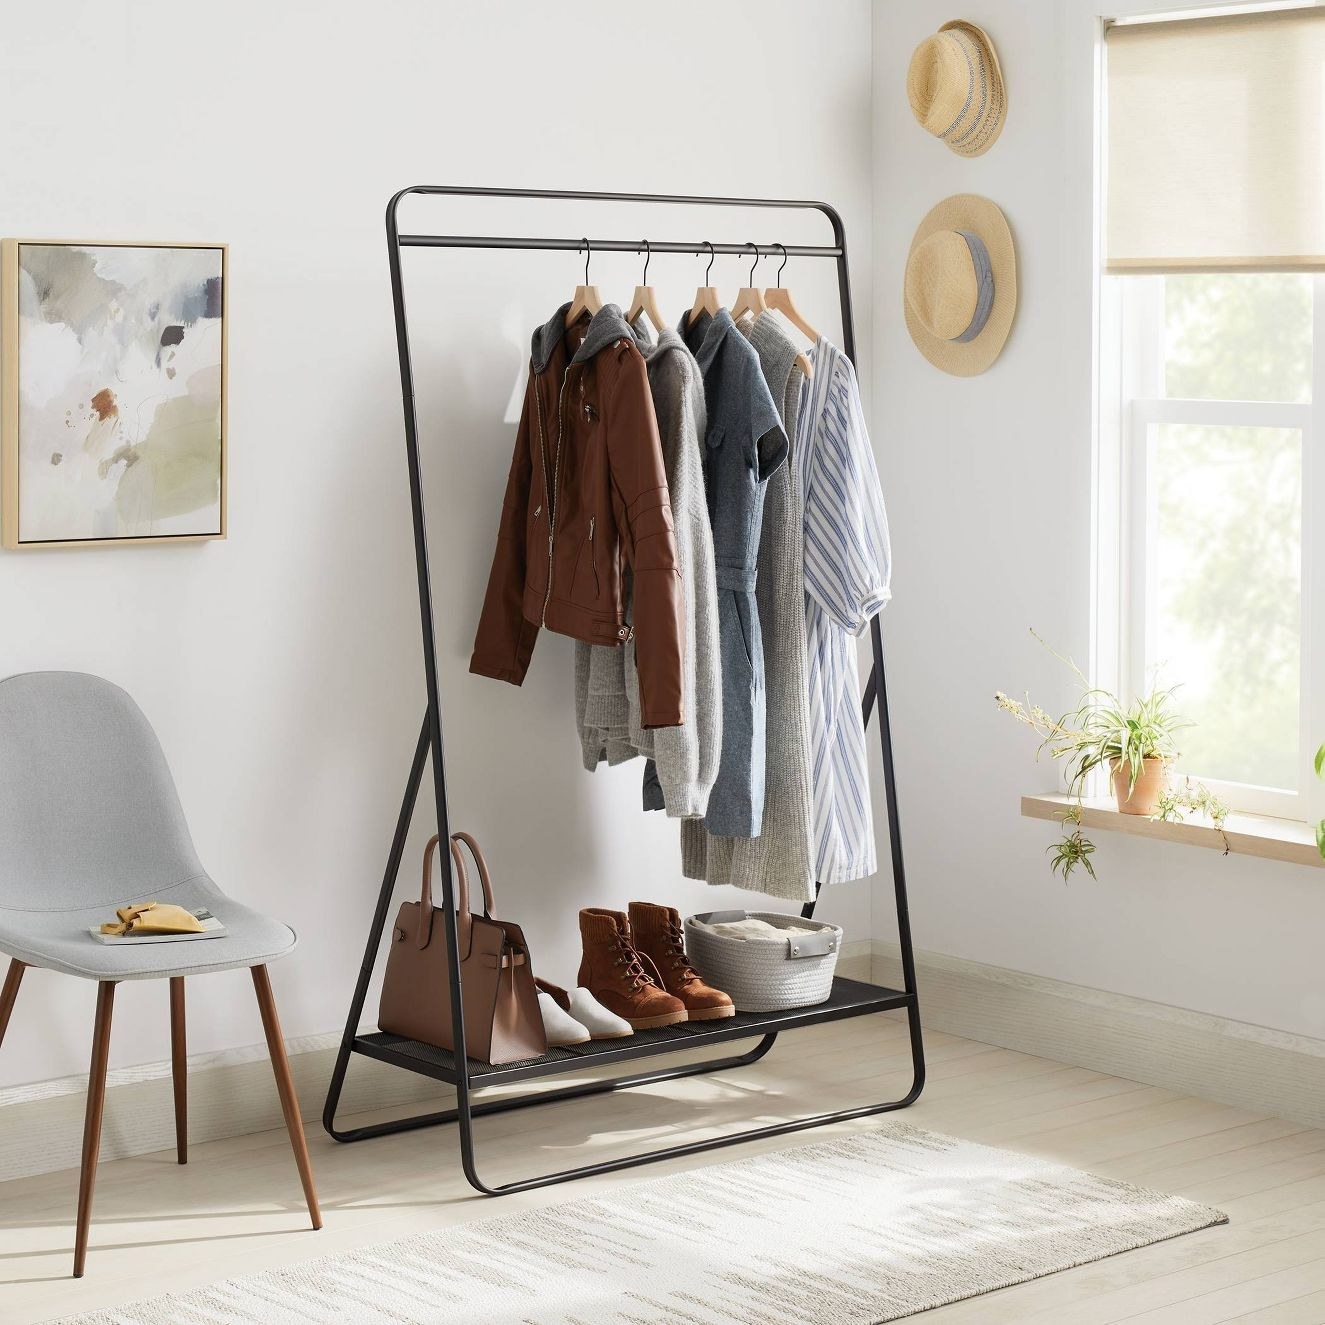 The garment rack in a room with clothes hanging and shoes on the bottom